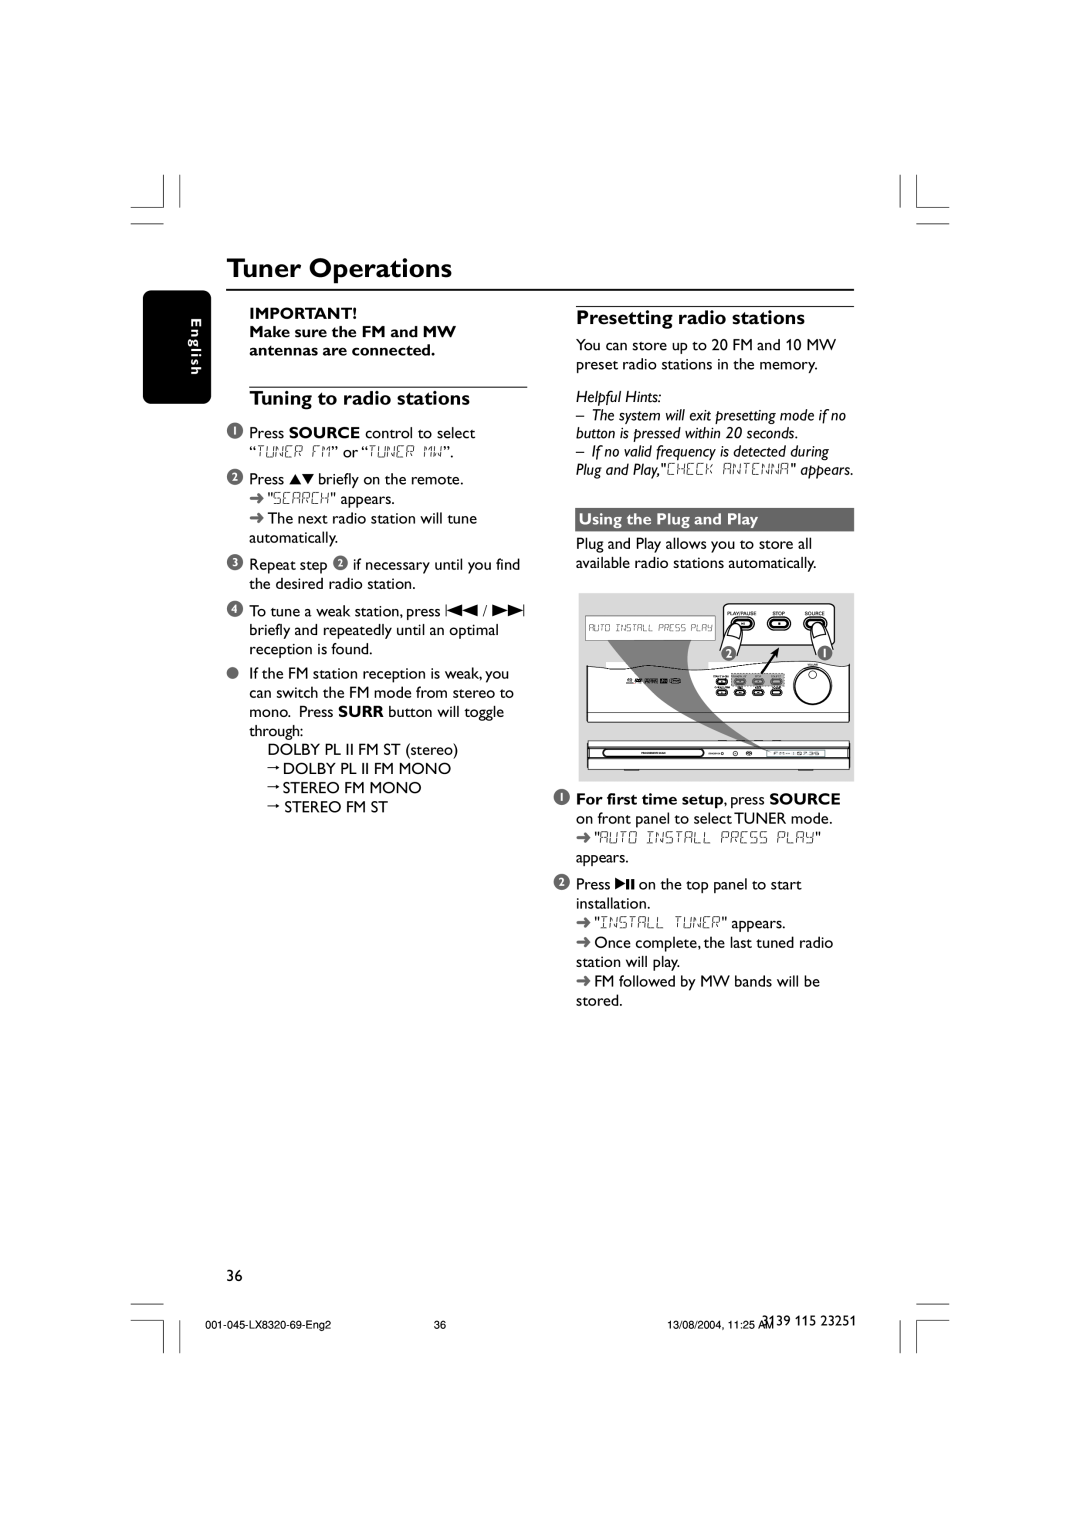 Philips LX8320 user manual Tuner Operations, Tuning to radio stations, Presetting radio stations, Helpful Hints 